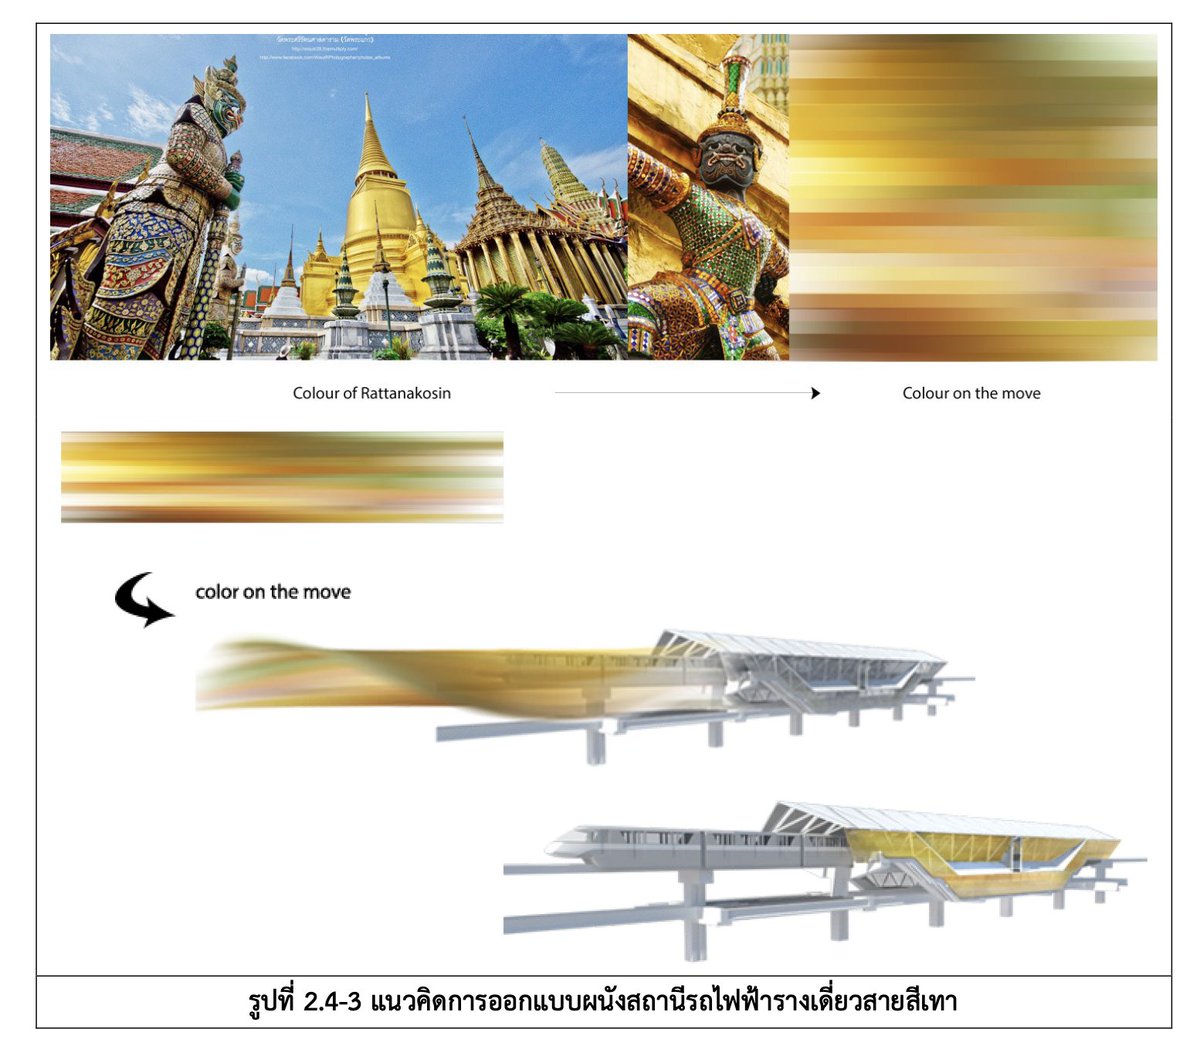 Reading Bangkok Grey Line Monorail plans, and I have to see this is the funniest inspiration for station design ever